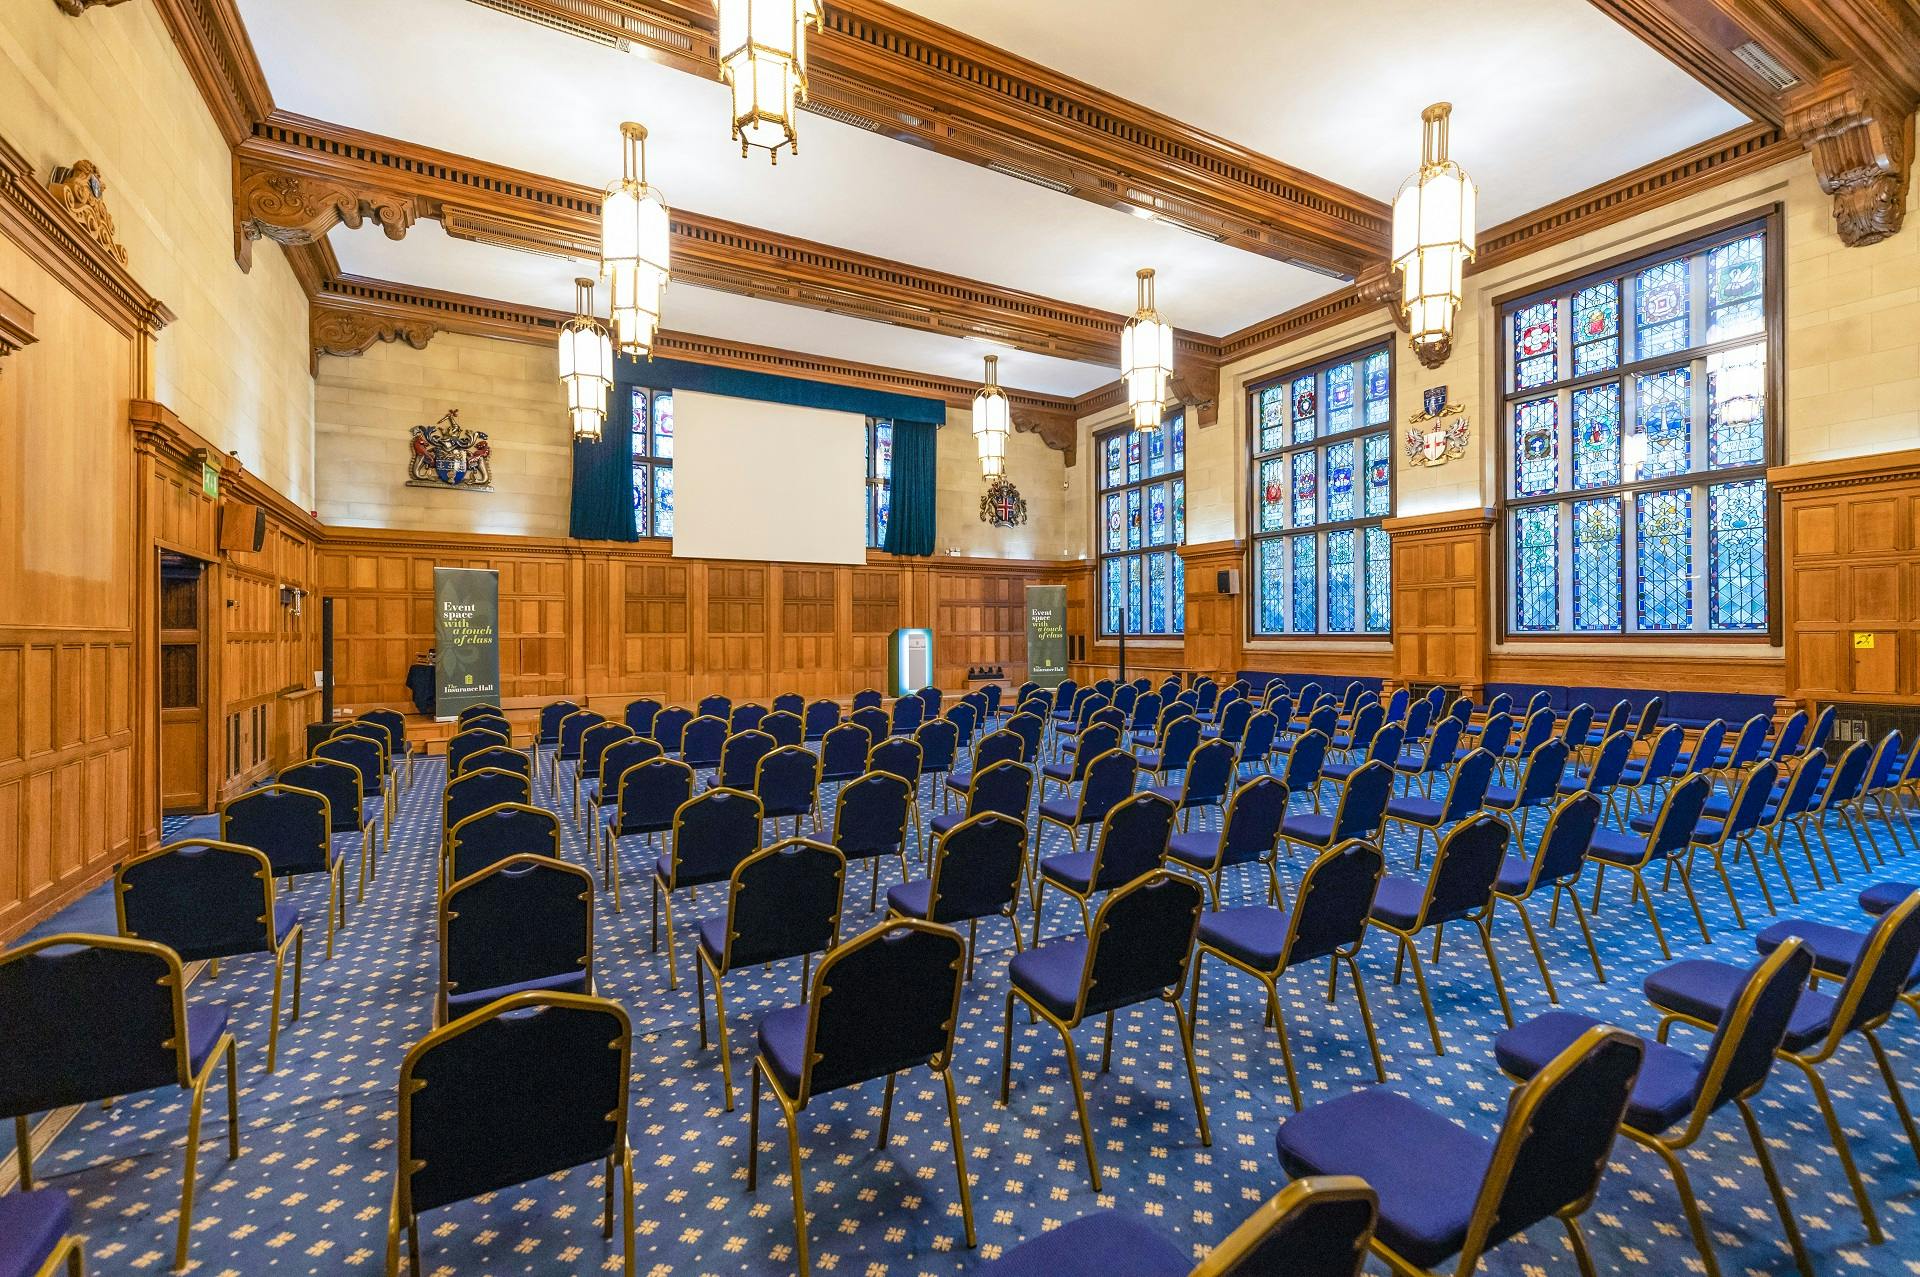 Corporate Team Building Venues - The Insurance Hall